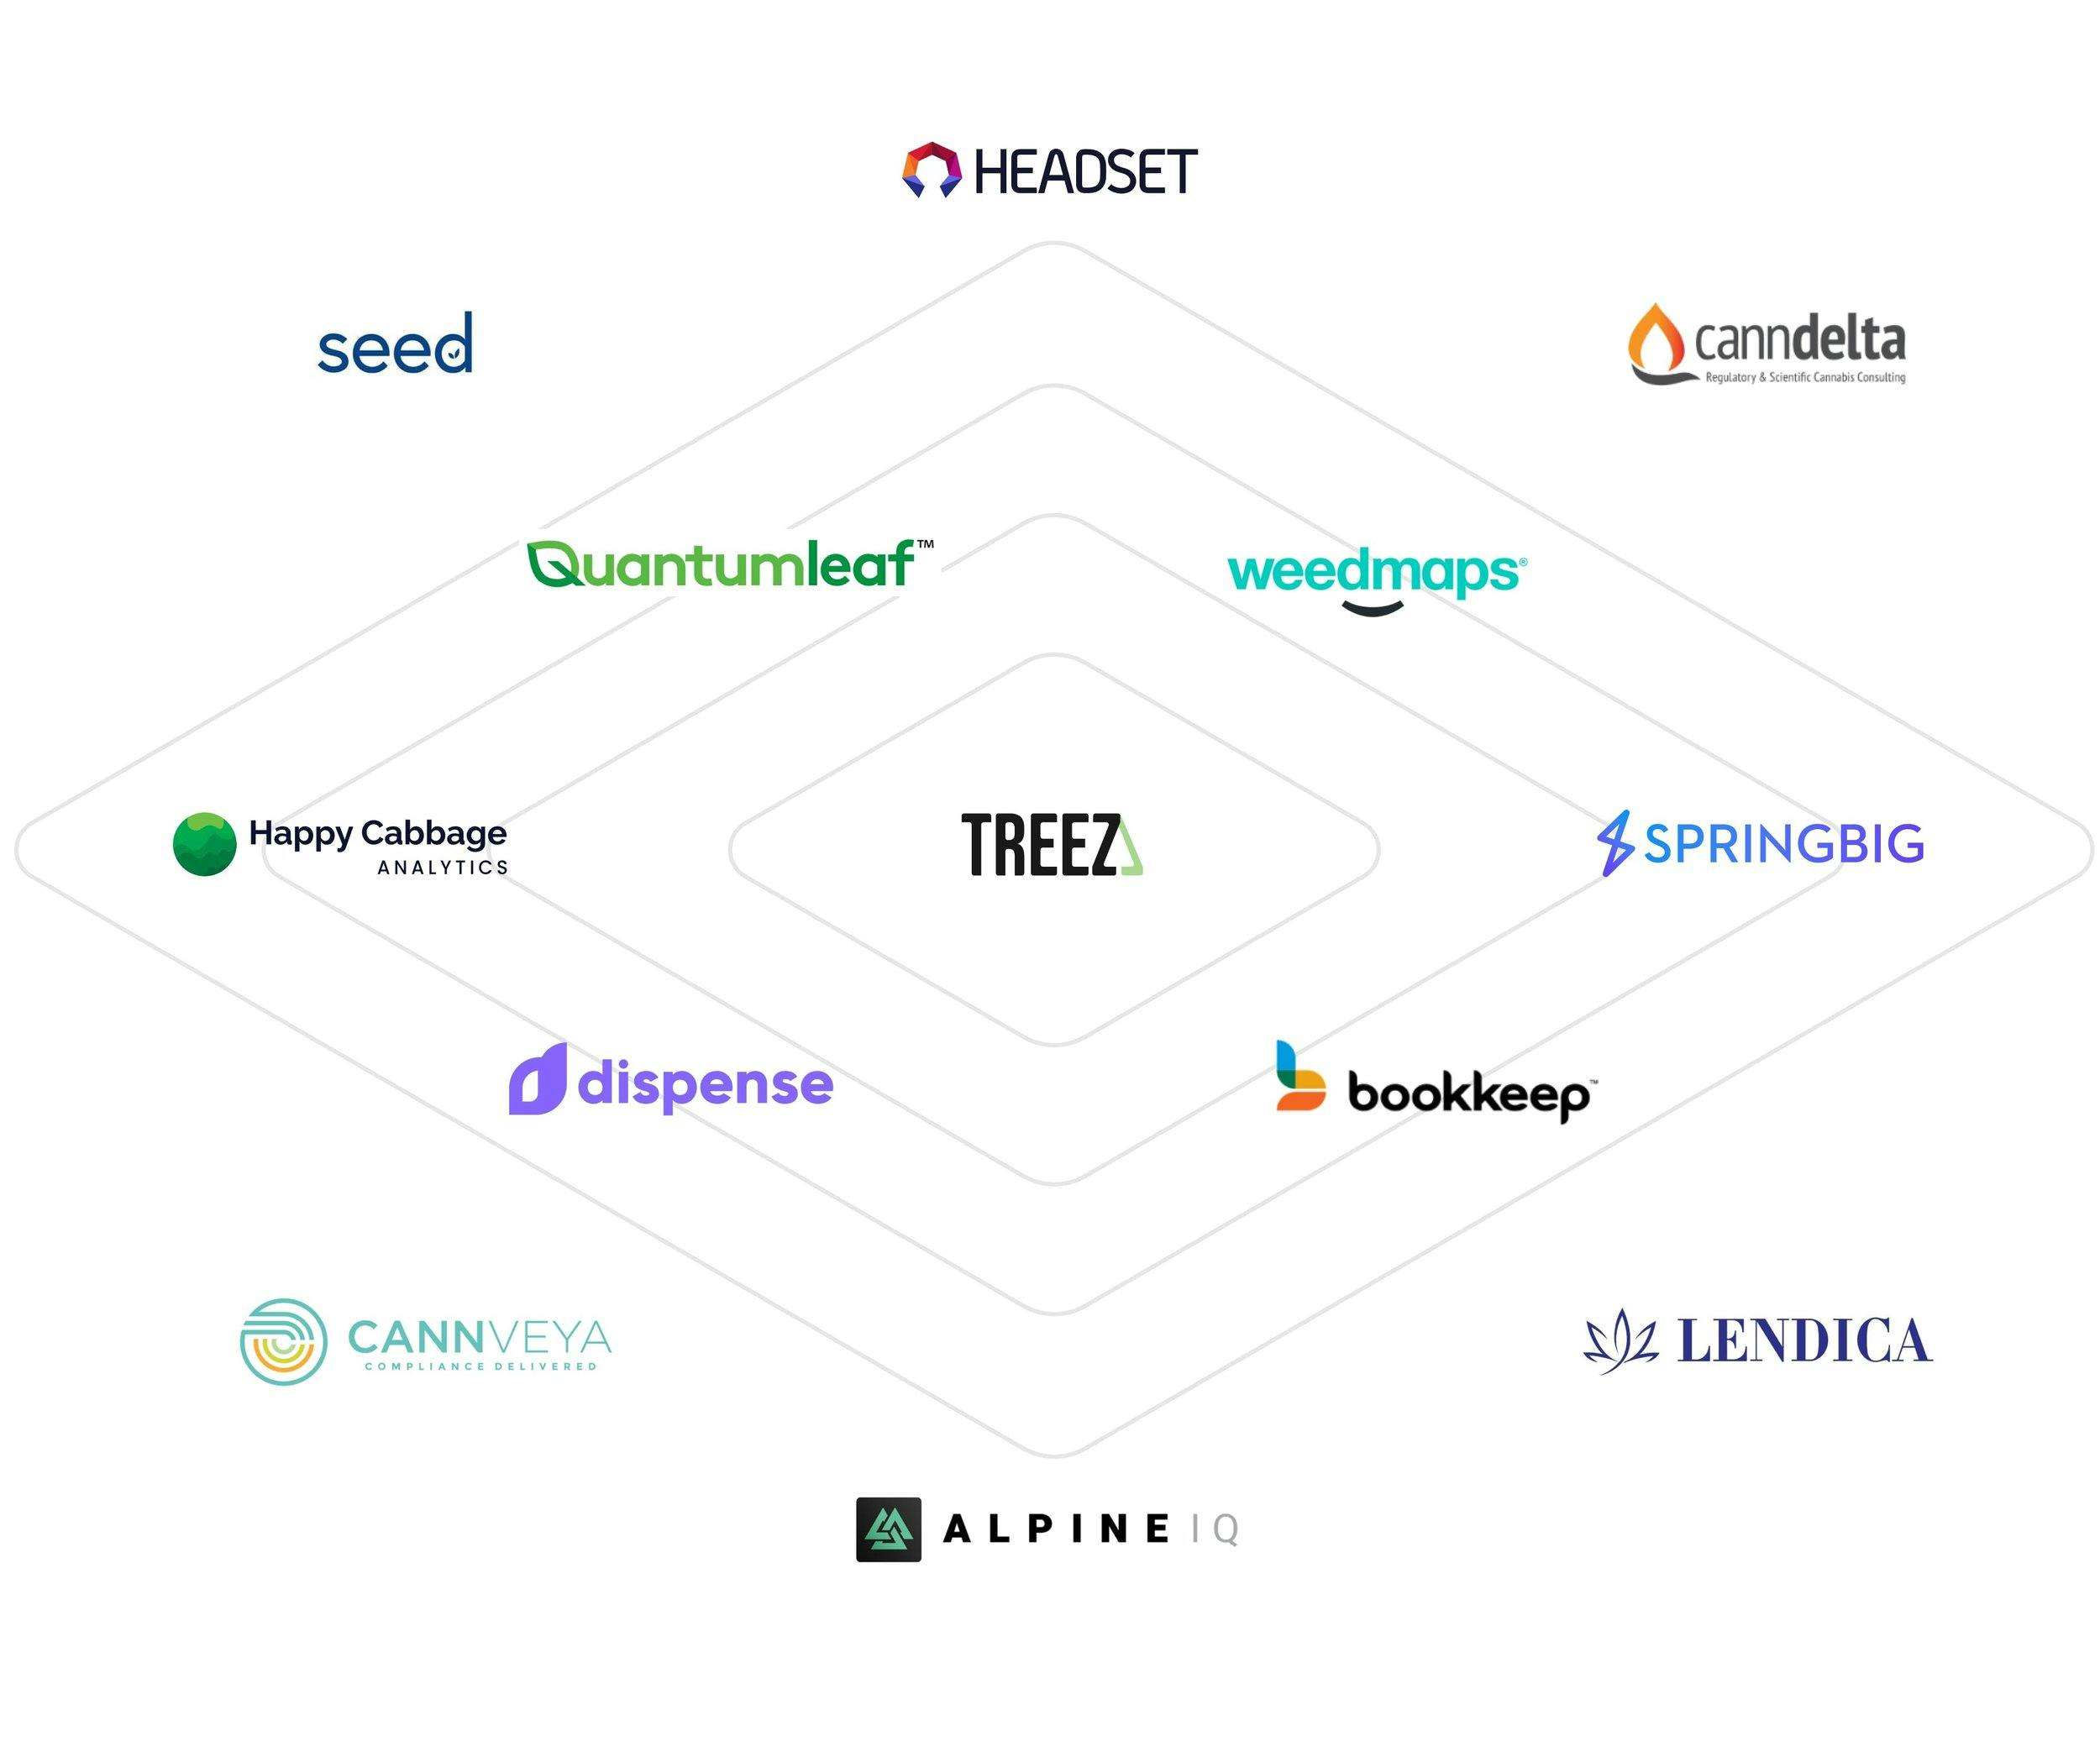 A web of logos is shown with Treez in the center - surrounding it are logos of other cannabis businesses Treez supports, dispense, bookkeep, springbig, weedmaps, quantumleaf, happy cabbage analytics, cannveya, aplineiq, lendica, seed, headset and canndelta